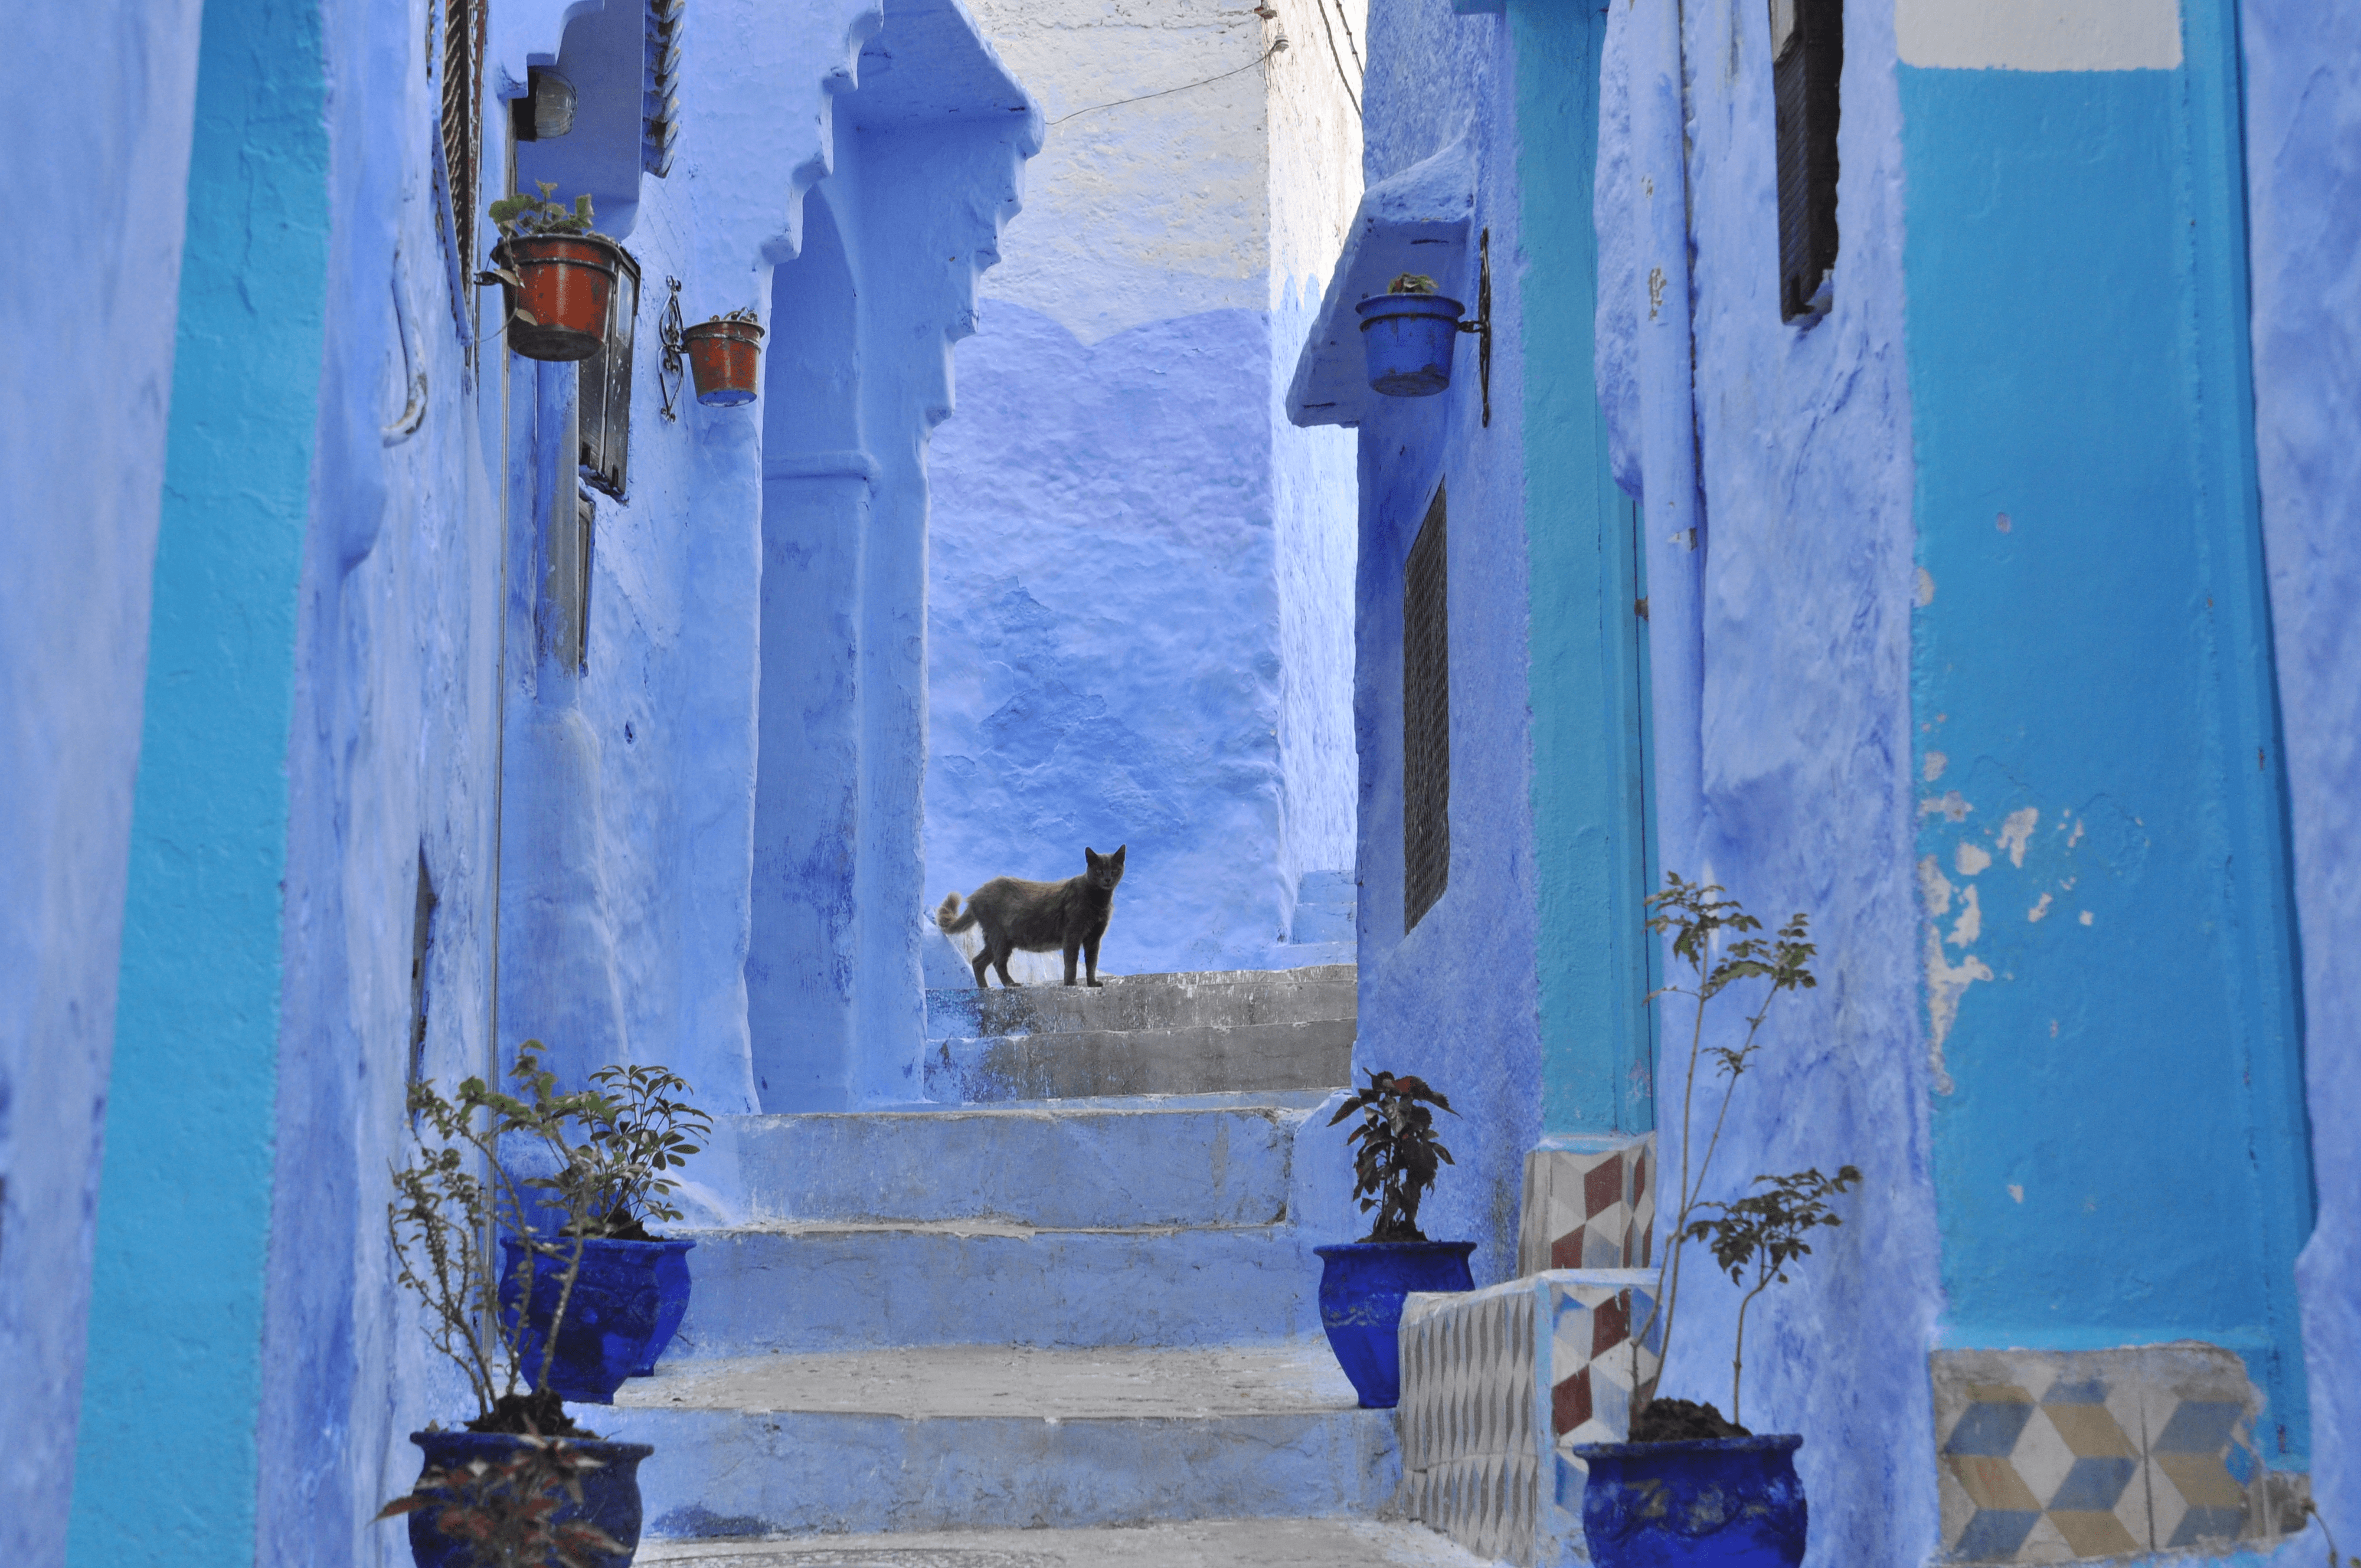 The grey cat from Chefchaouen